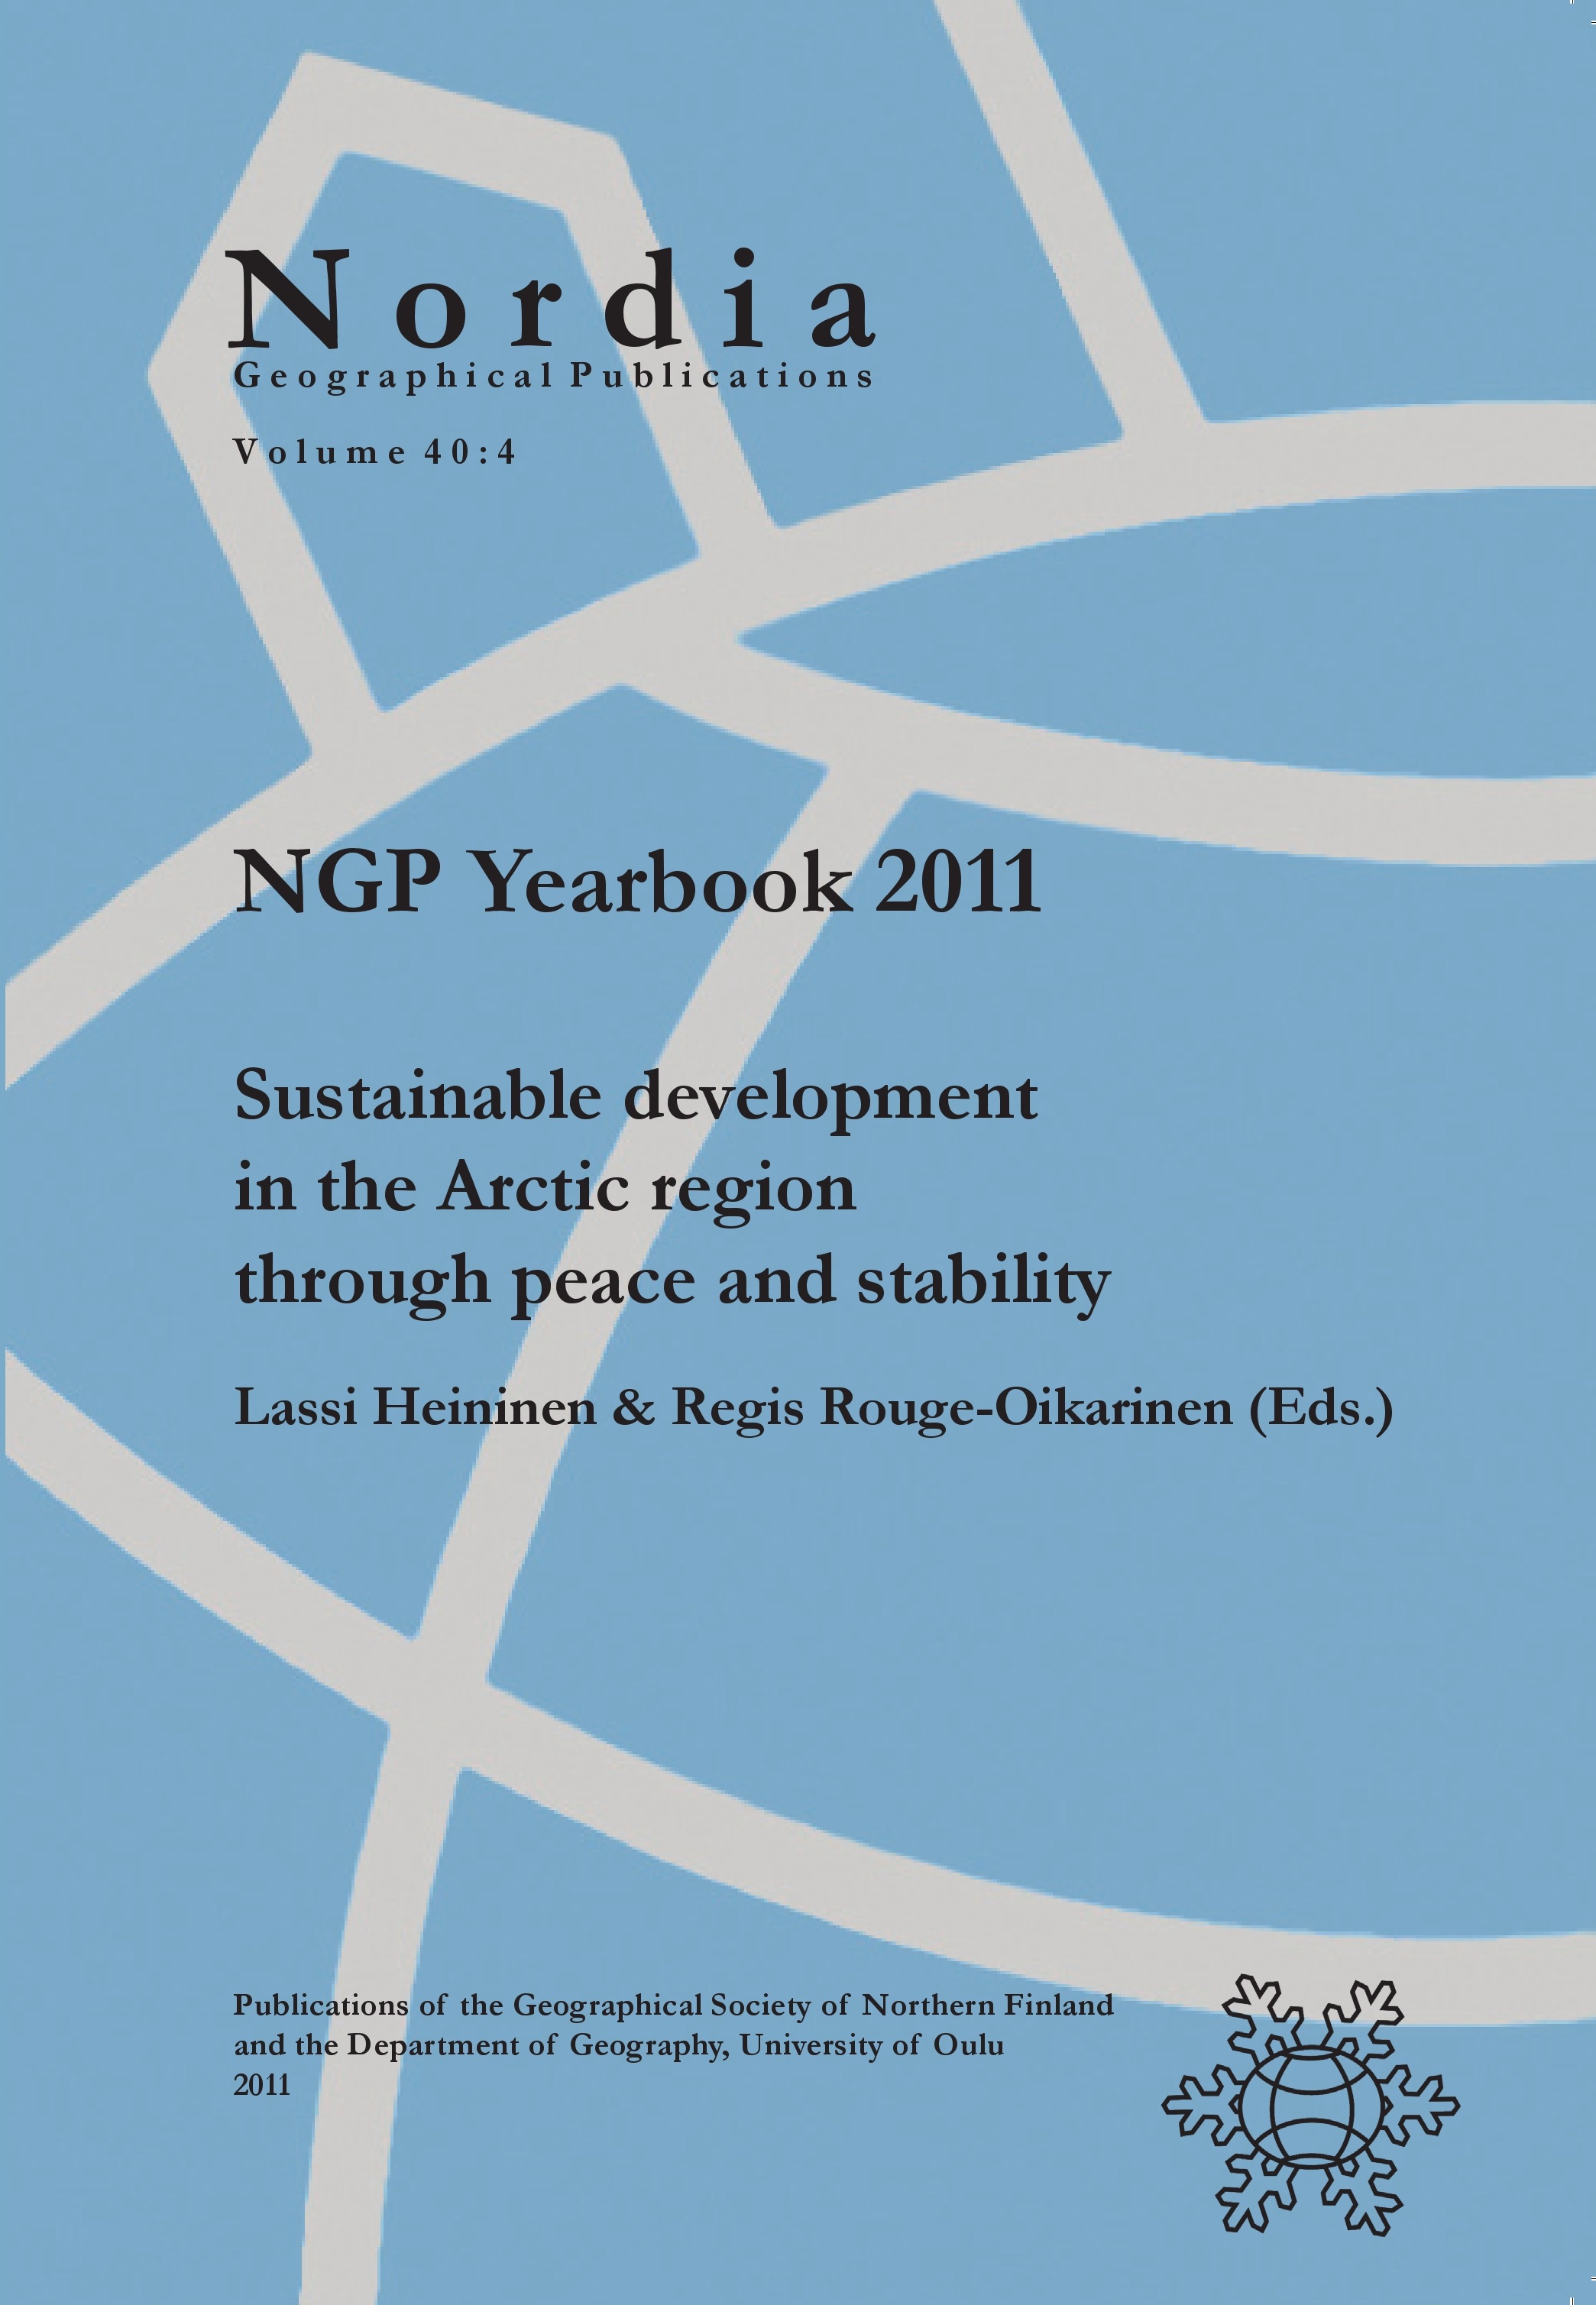 					View Vol. 40 No. 4: NGP Yearbook 2011: Sustainable development in the Arctic region through peace and stability
				